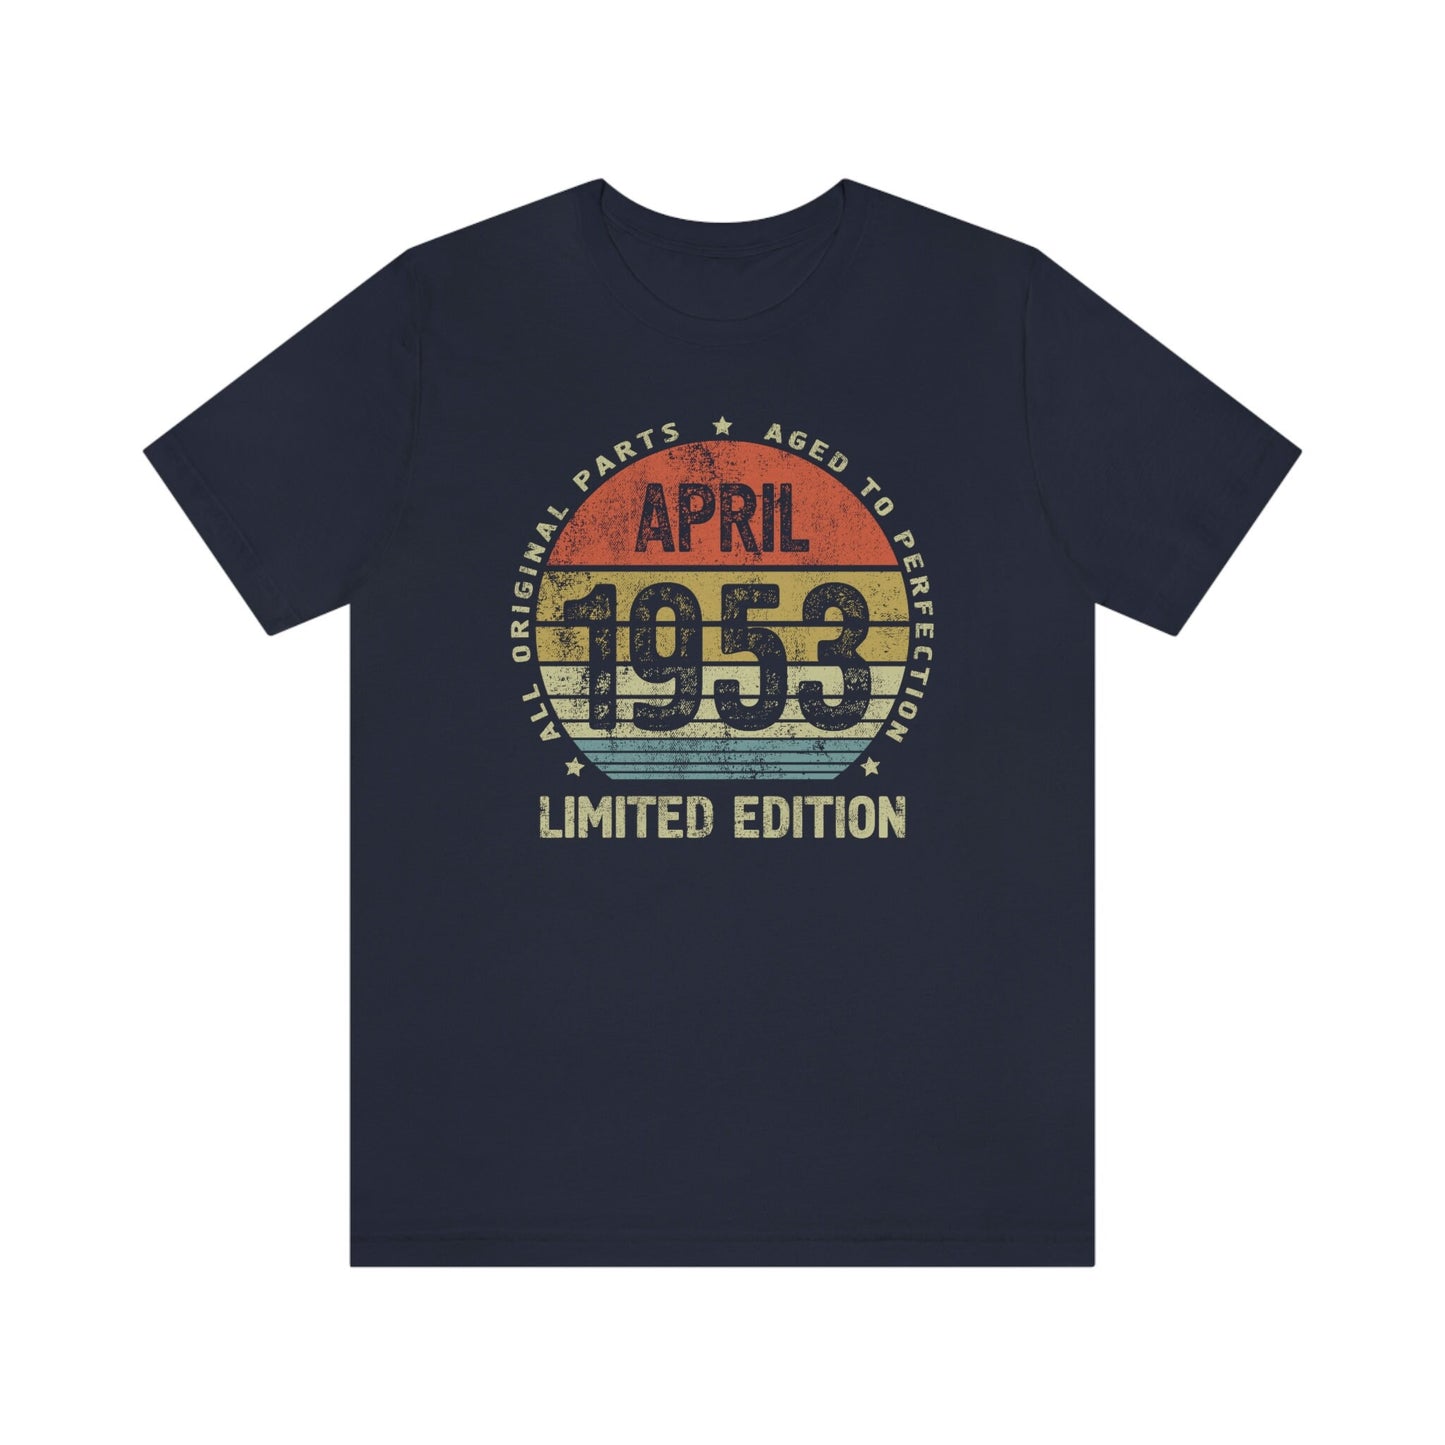 April 1953 birthday shirt for women or men, Gift shirt for wife or husband